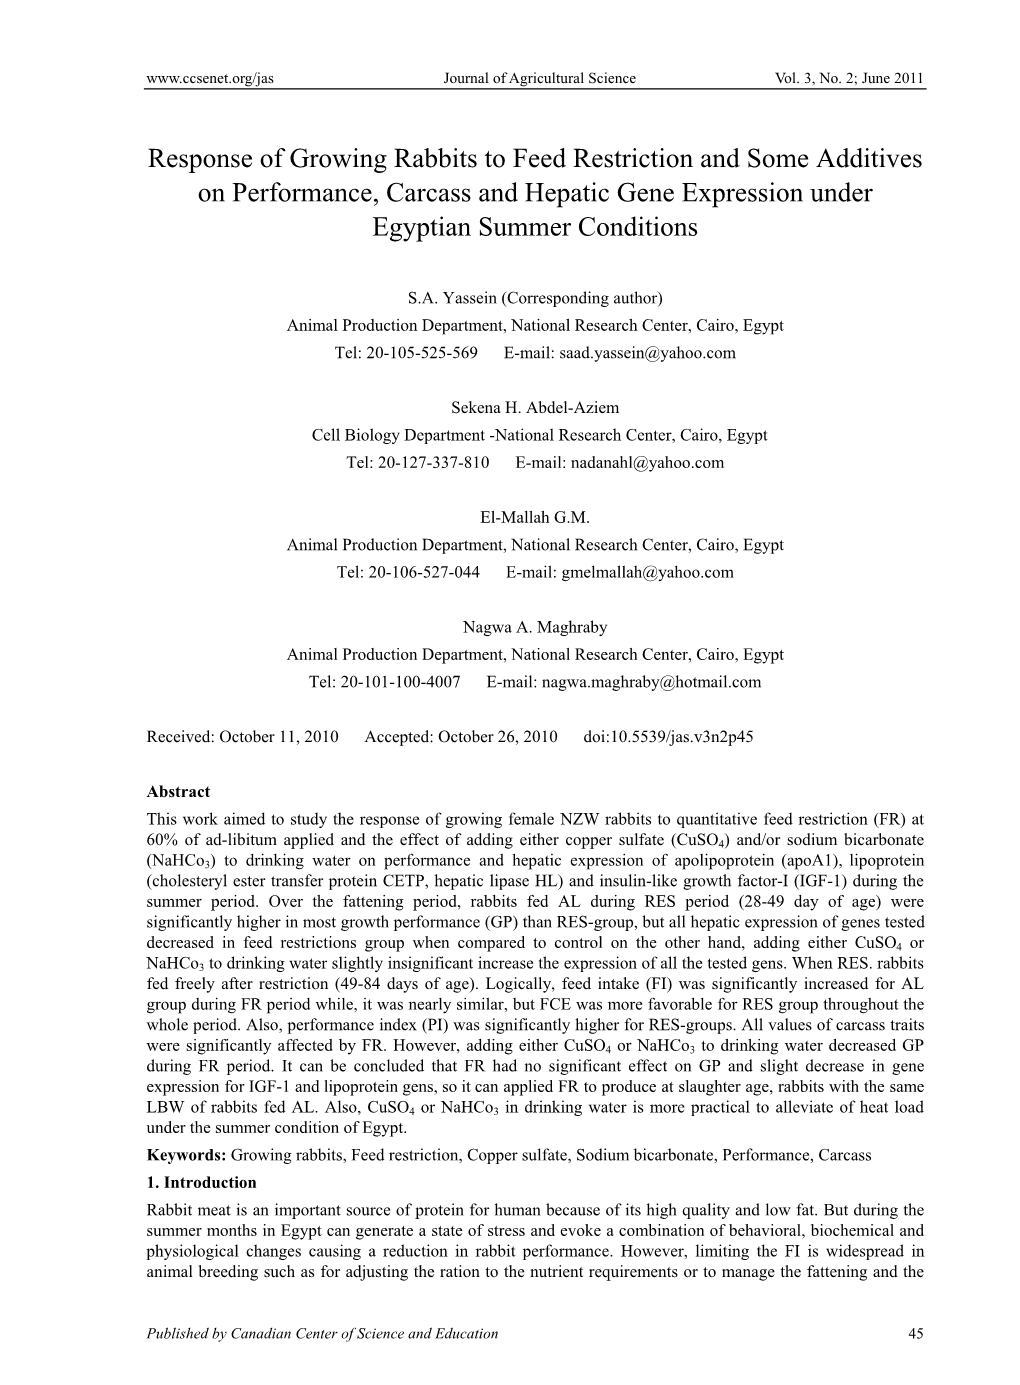 Response of Growing Rabbits to Feed Restriction and Some Additives on Performance, Carcass and Hepatic Gene Expression Under Egyptian Summer Conditions